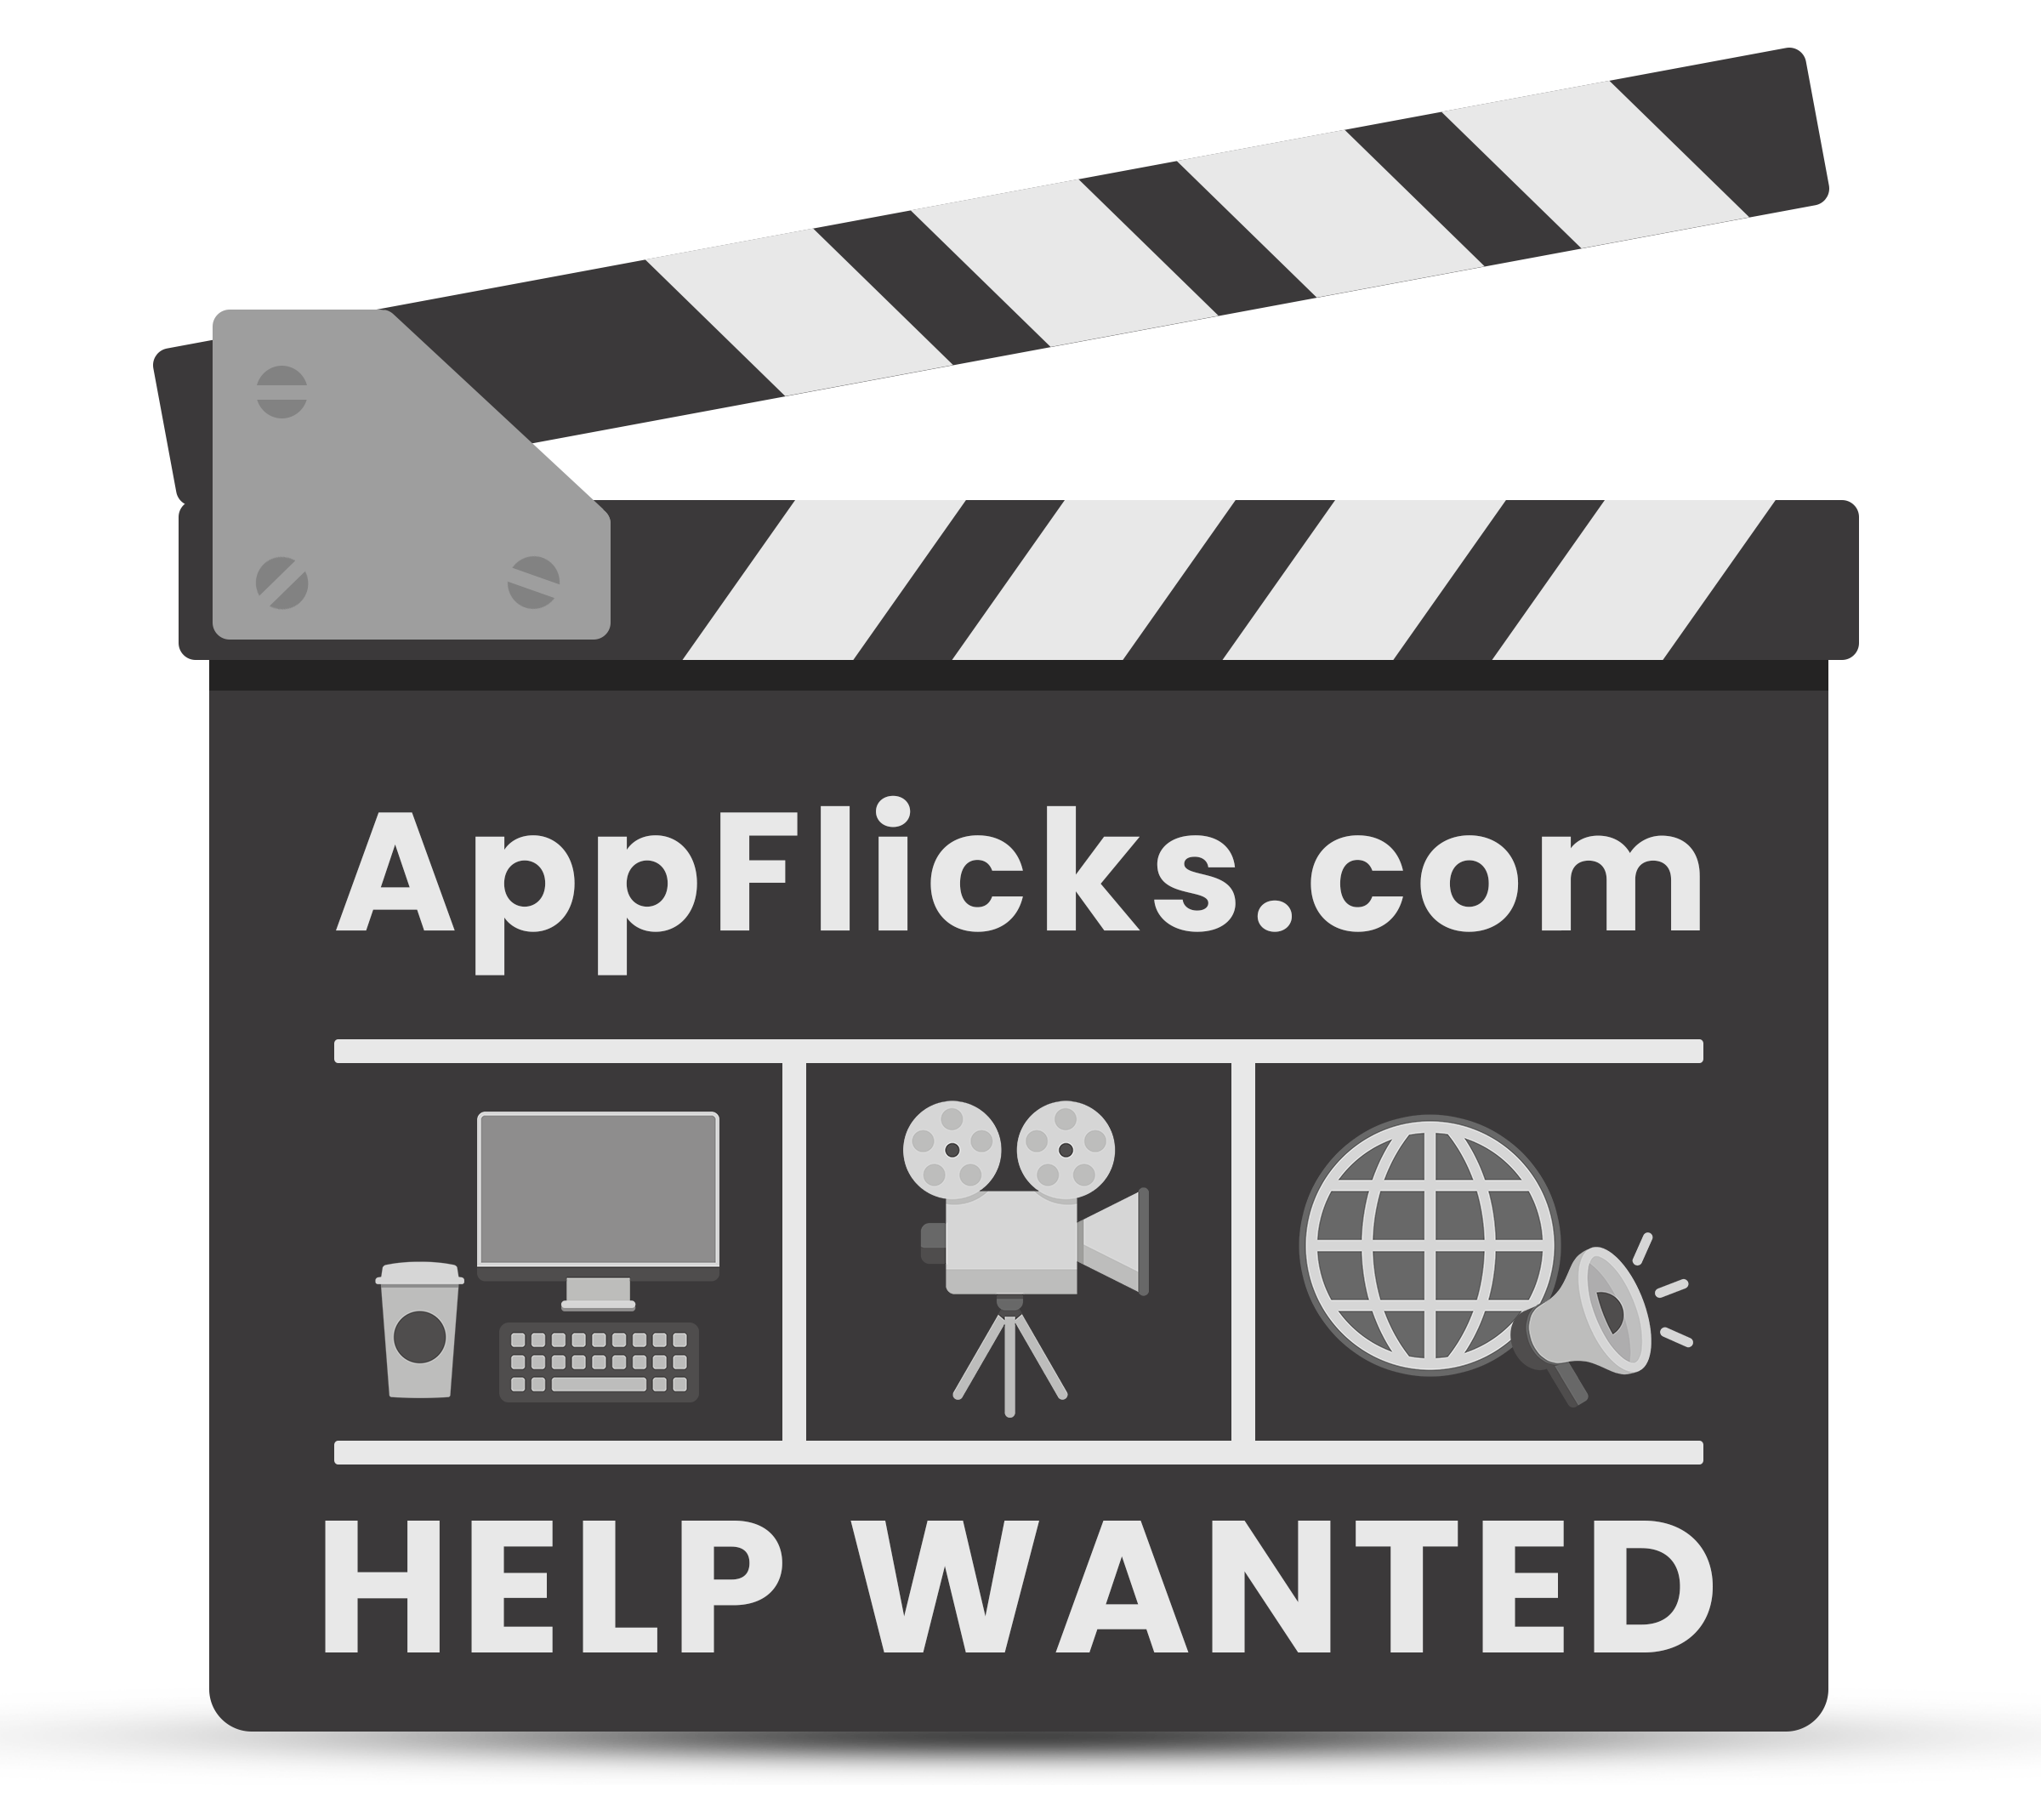 HELP WANTED – AppFlicks is Hiring!